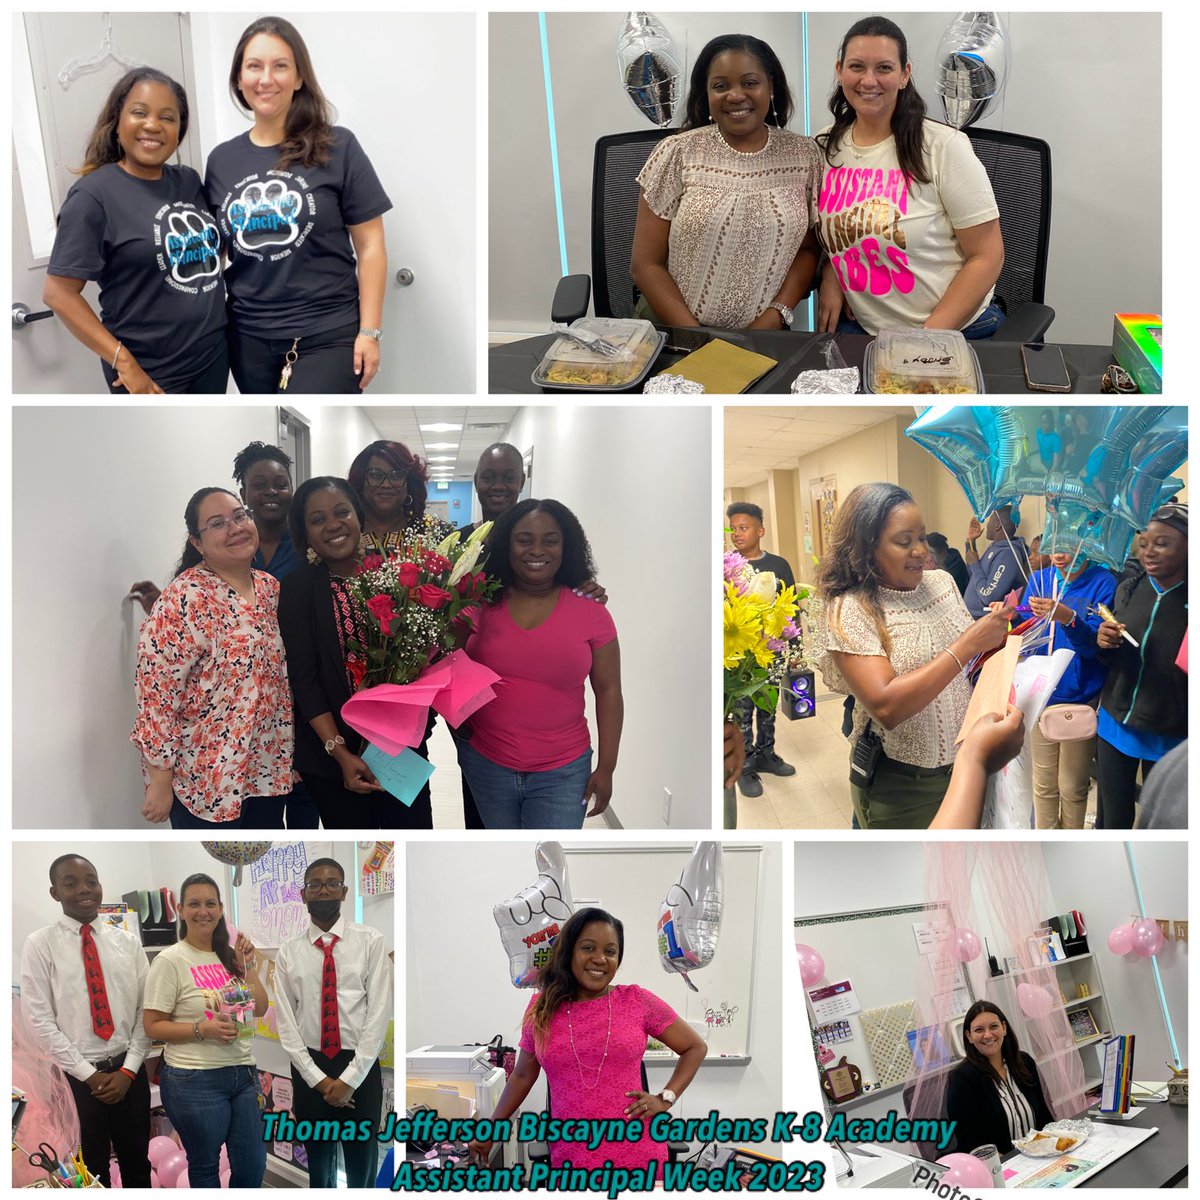 Celebrating and honoring our well deserved assistant principals this week at Thomas Jefferson Biscayne Gardens K-8 Academy. #OurAPsRock #TJBG #Northregion #NRO #Jaguars